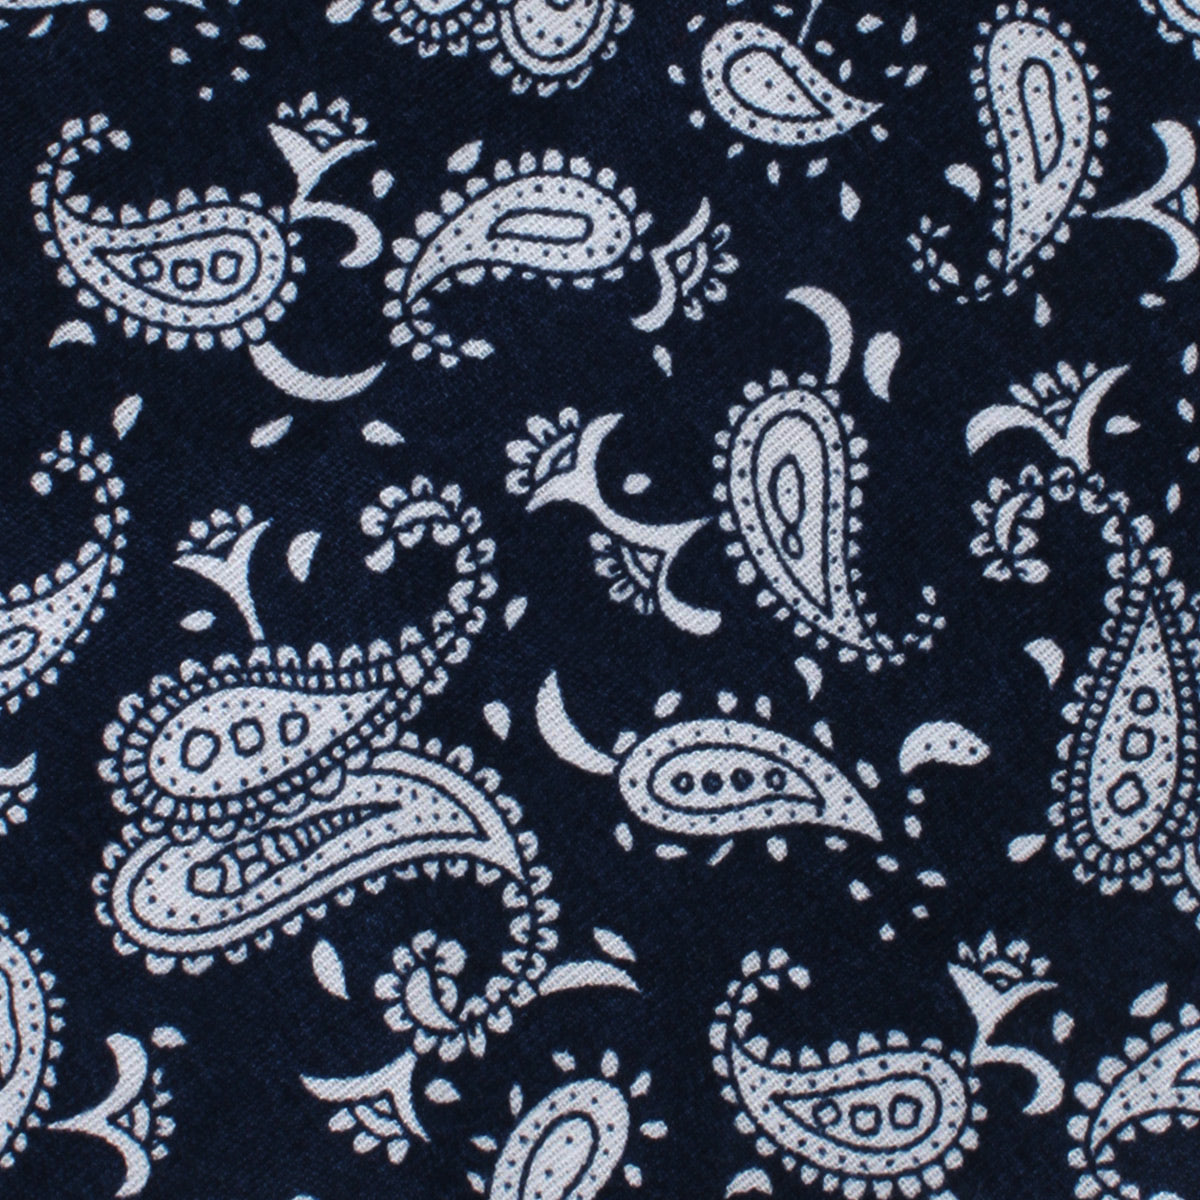 Moroccan Blue Paisley Pocket Square Fabric